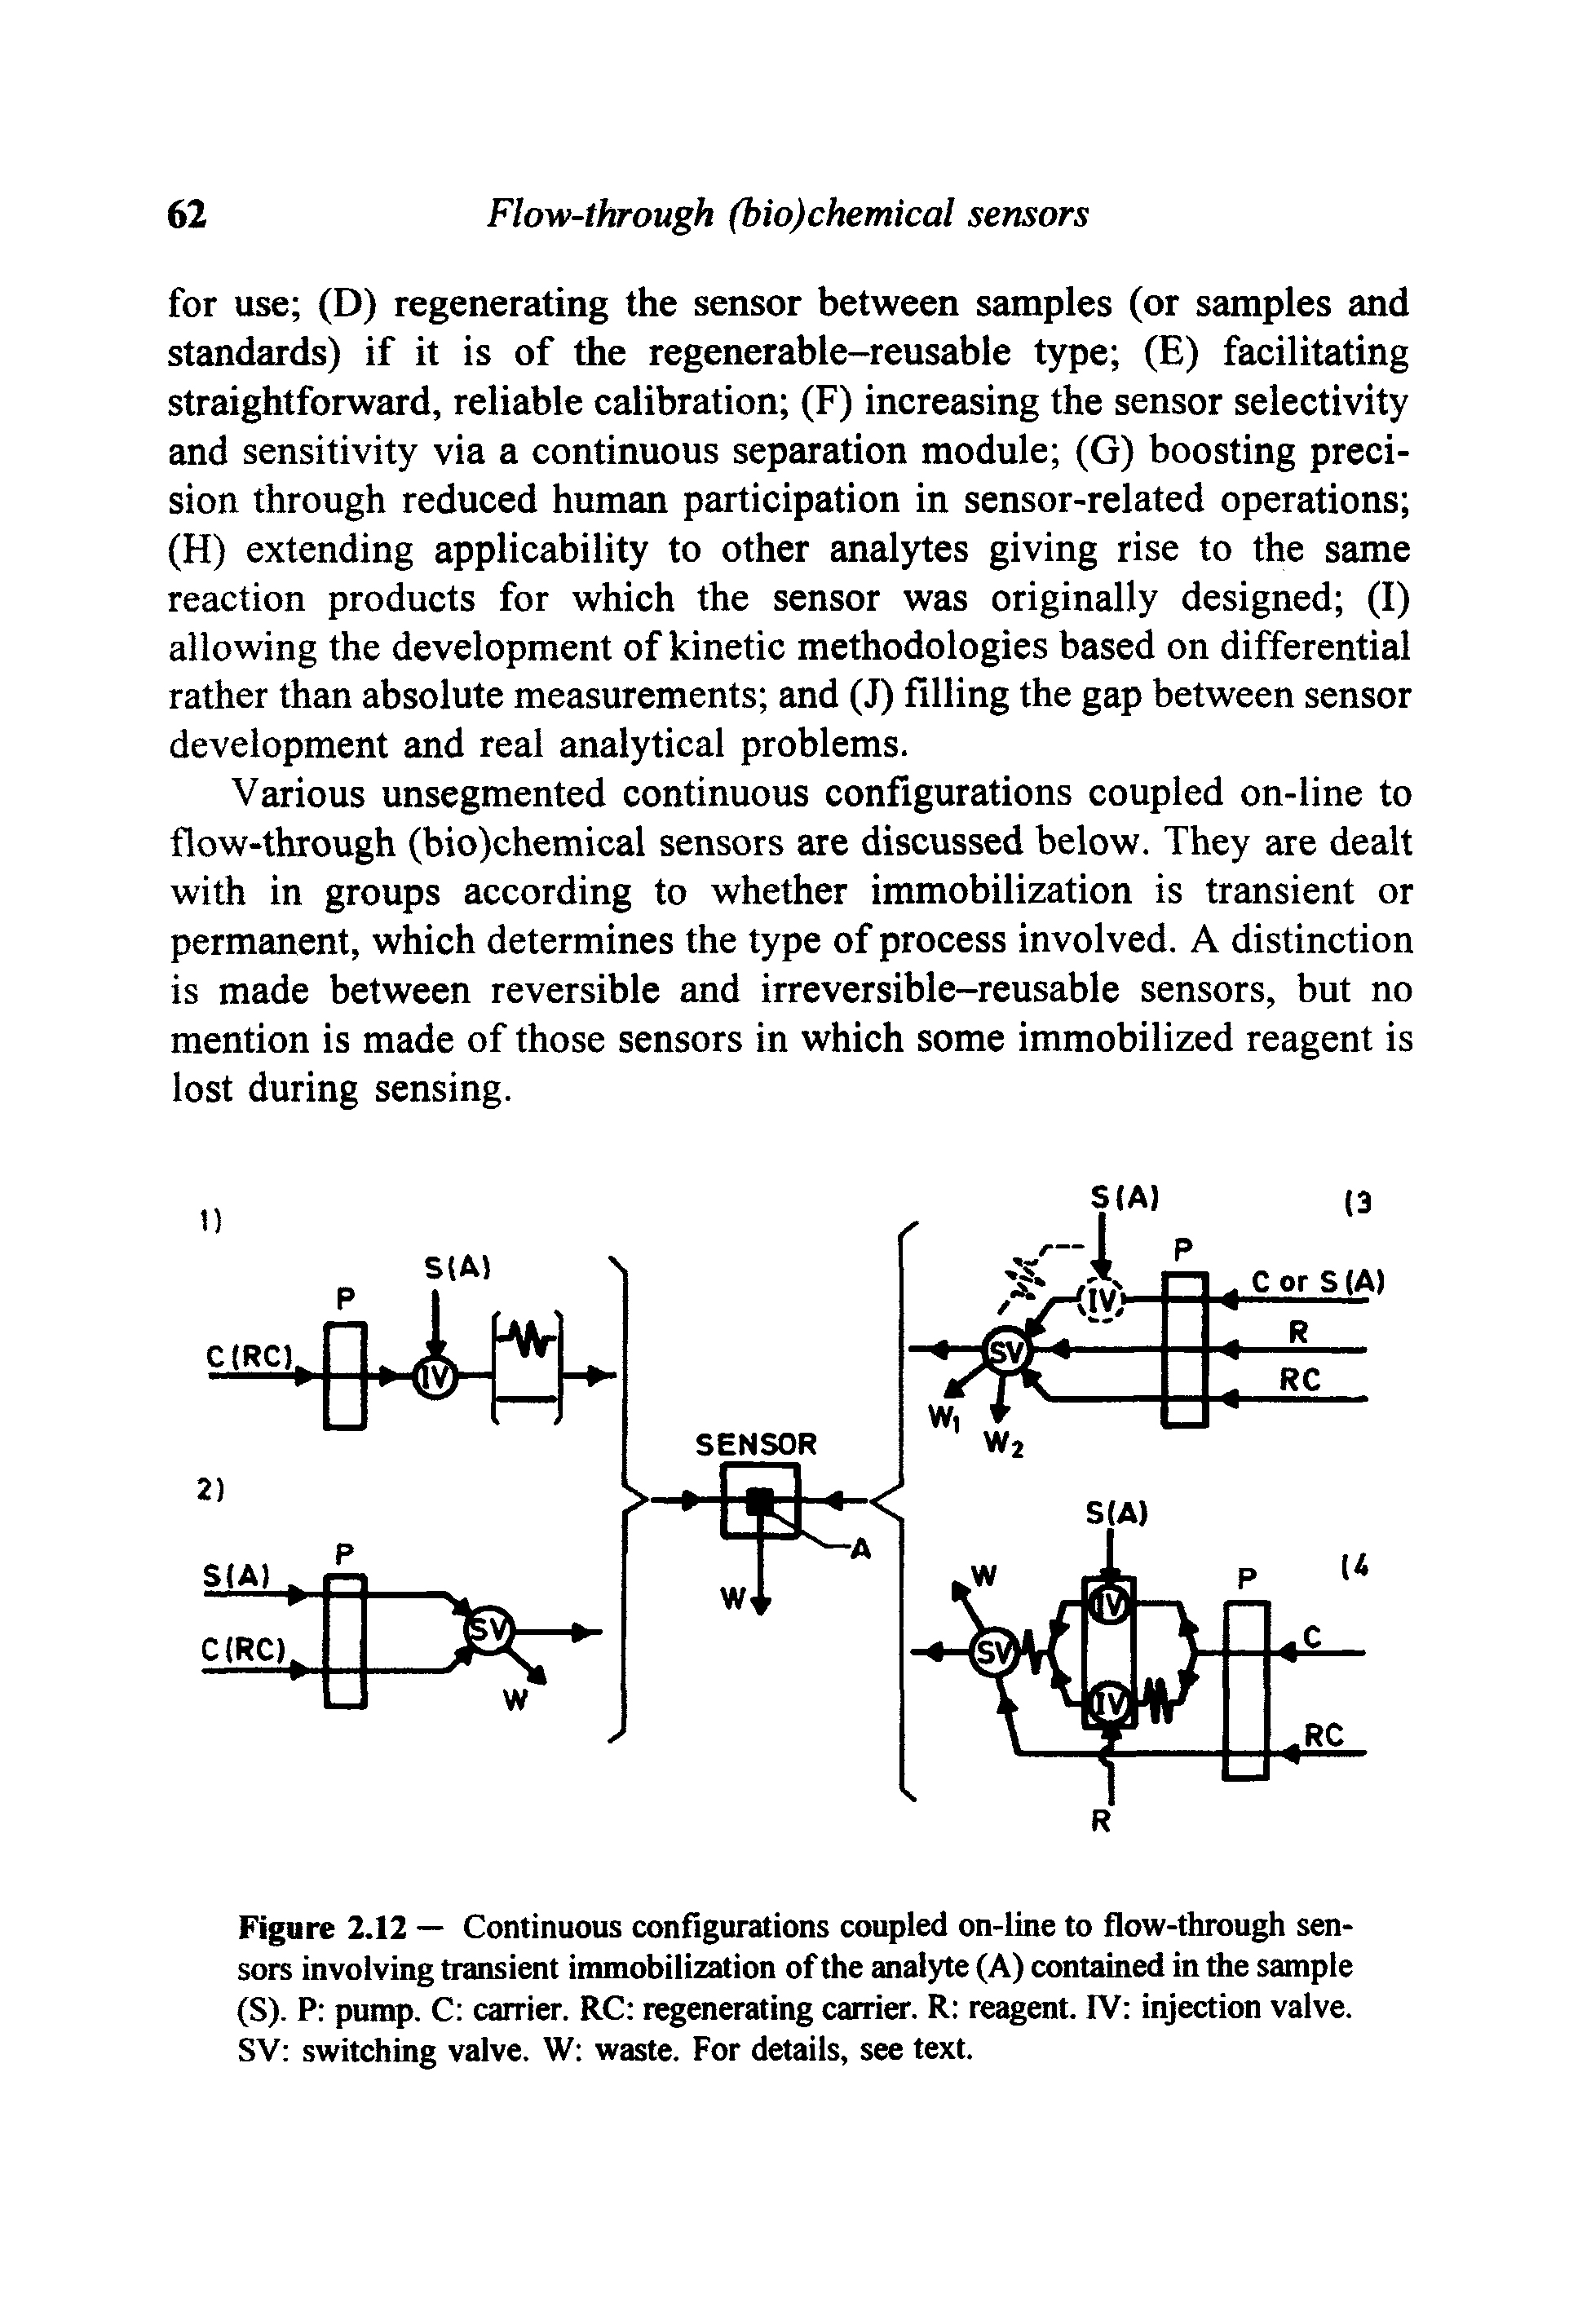 Figure 2.12 — Continuous configurations coupled on-line to flow-through sensors involving transient immobilization of the analyte (A) contained in the sample (S). P pump. C carrier. RC regenerating carrier. R reagent. IV injection valve. SV switching valve. W waste. For details, see text.